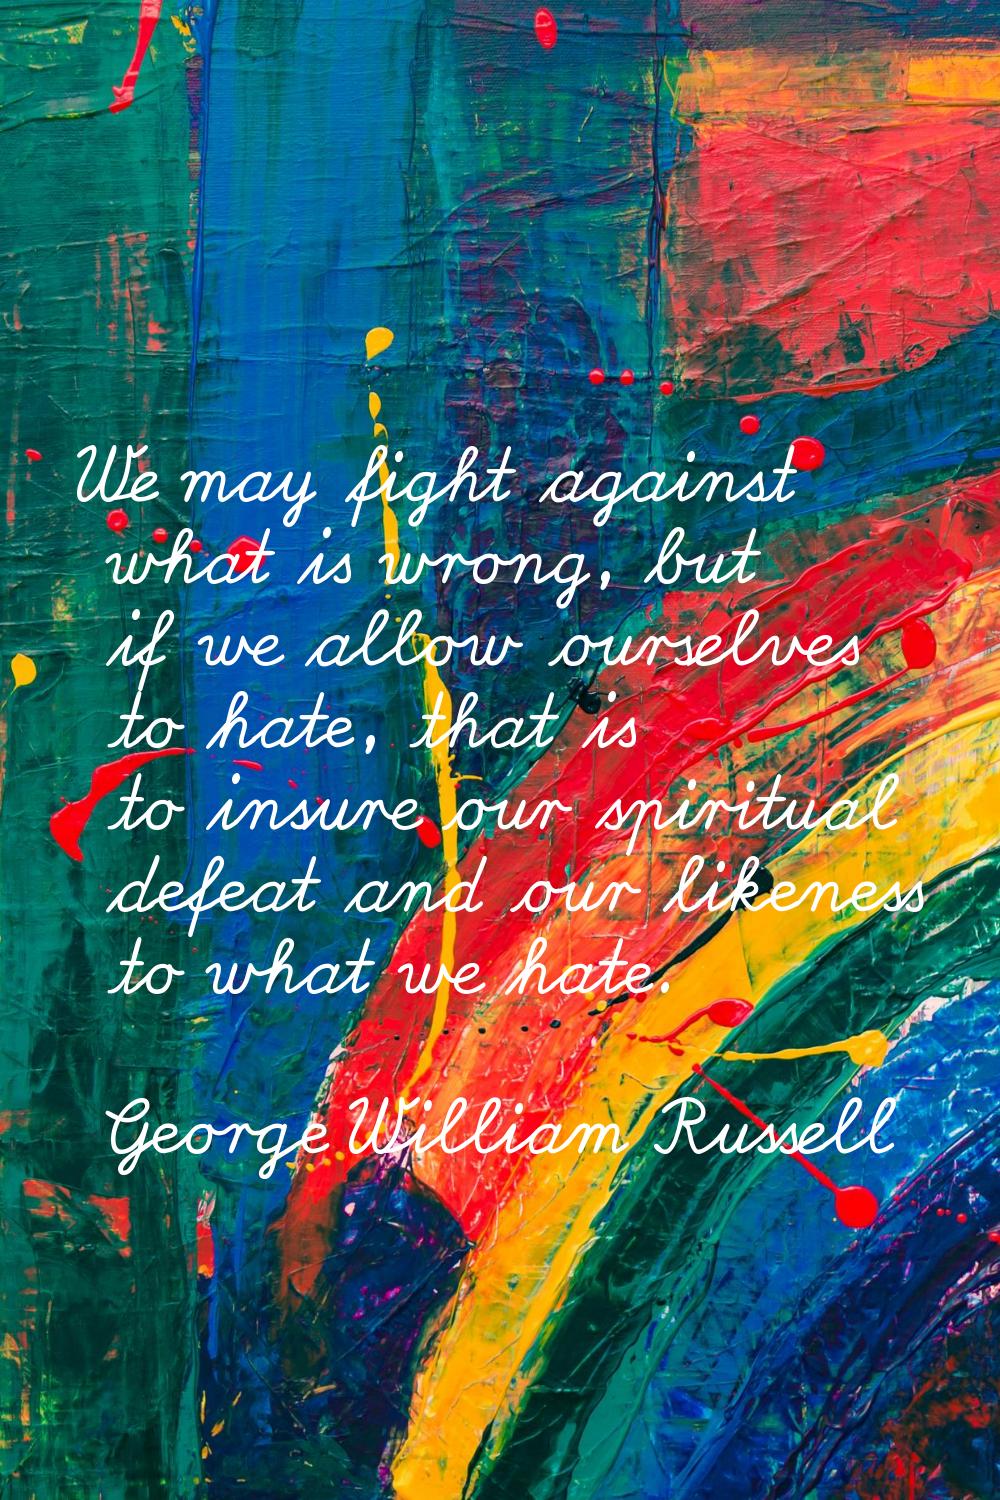 We may fight against what is wrong, but if we allow ourselves to hate, that is to insure our spirit